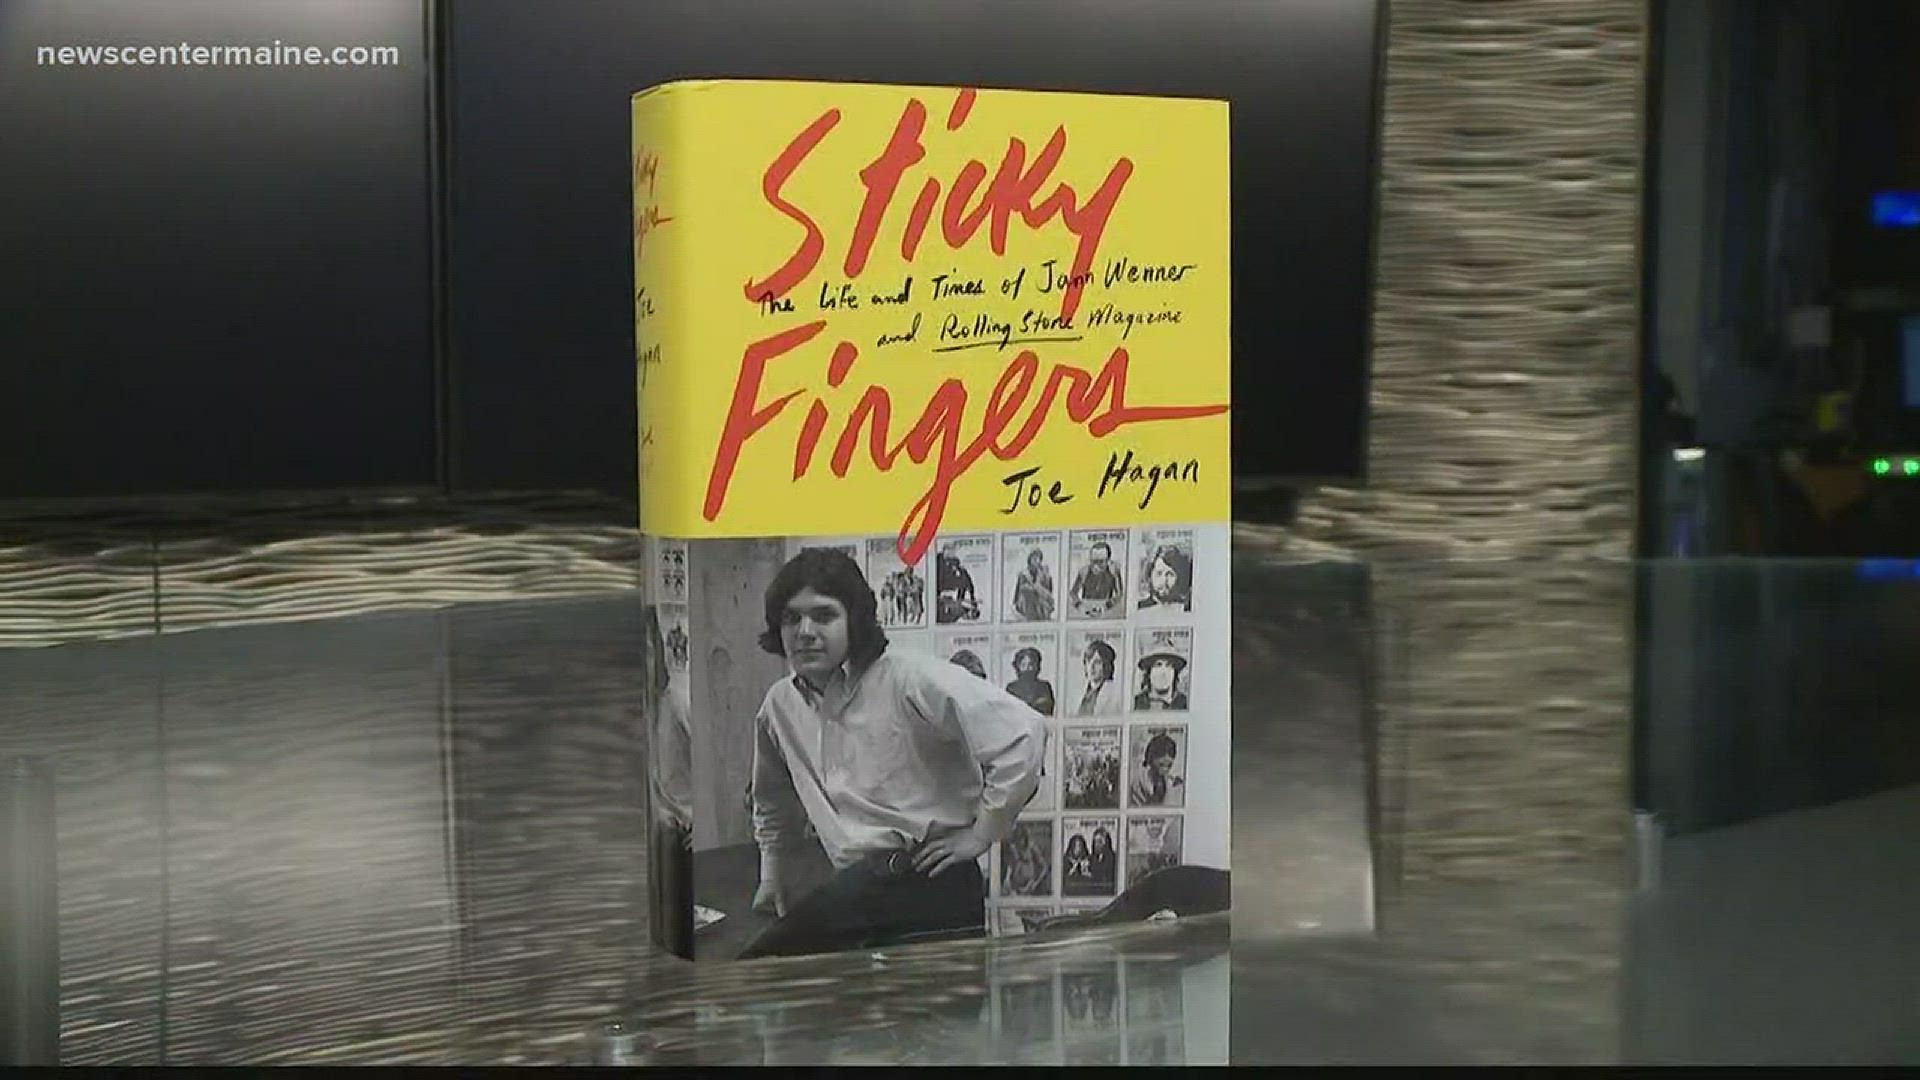 Joe Hagan talks about Sticky Fingers: The Life & Times of Jann Wenner and Roliing Stone Magazine